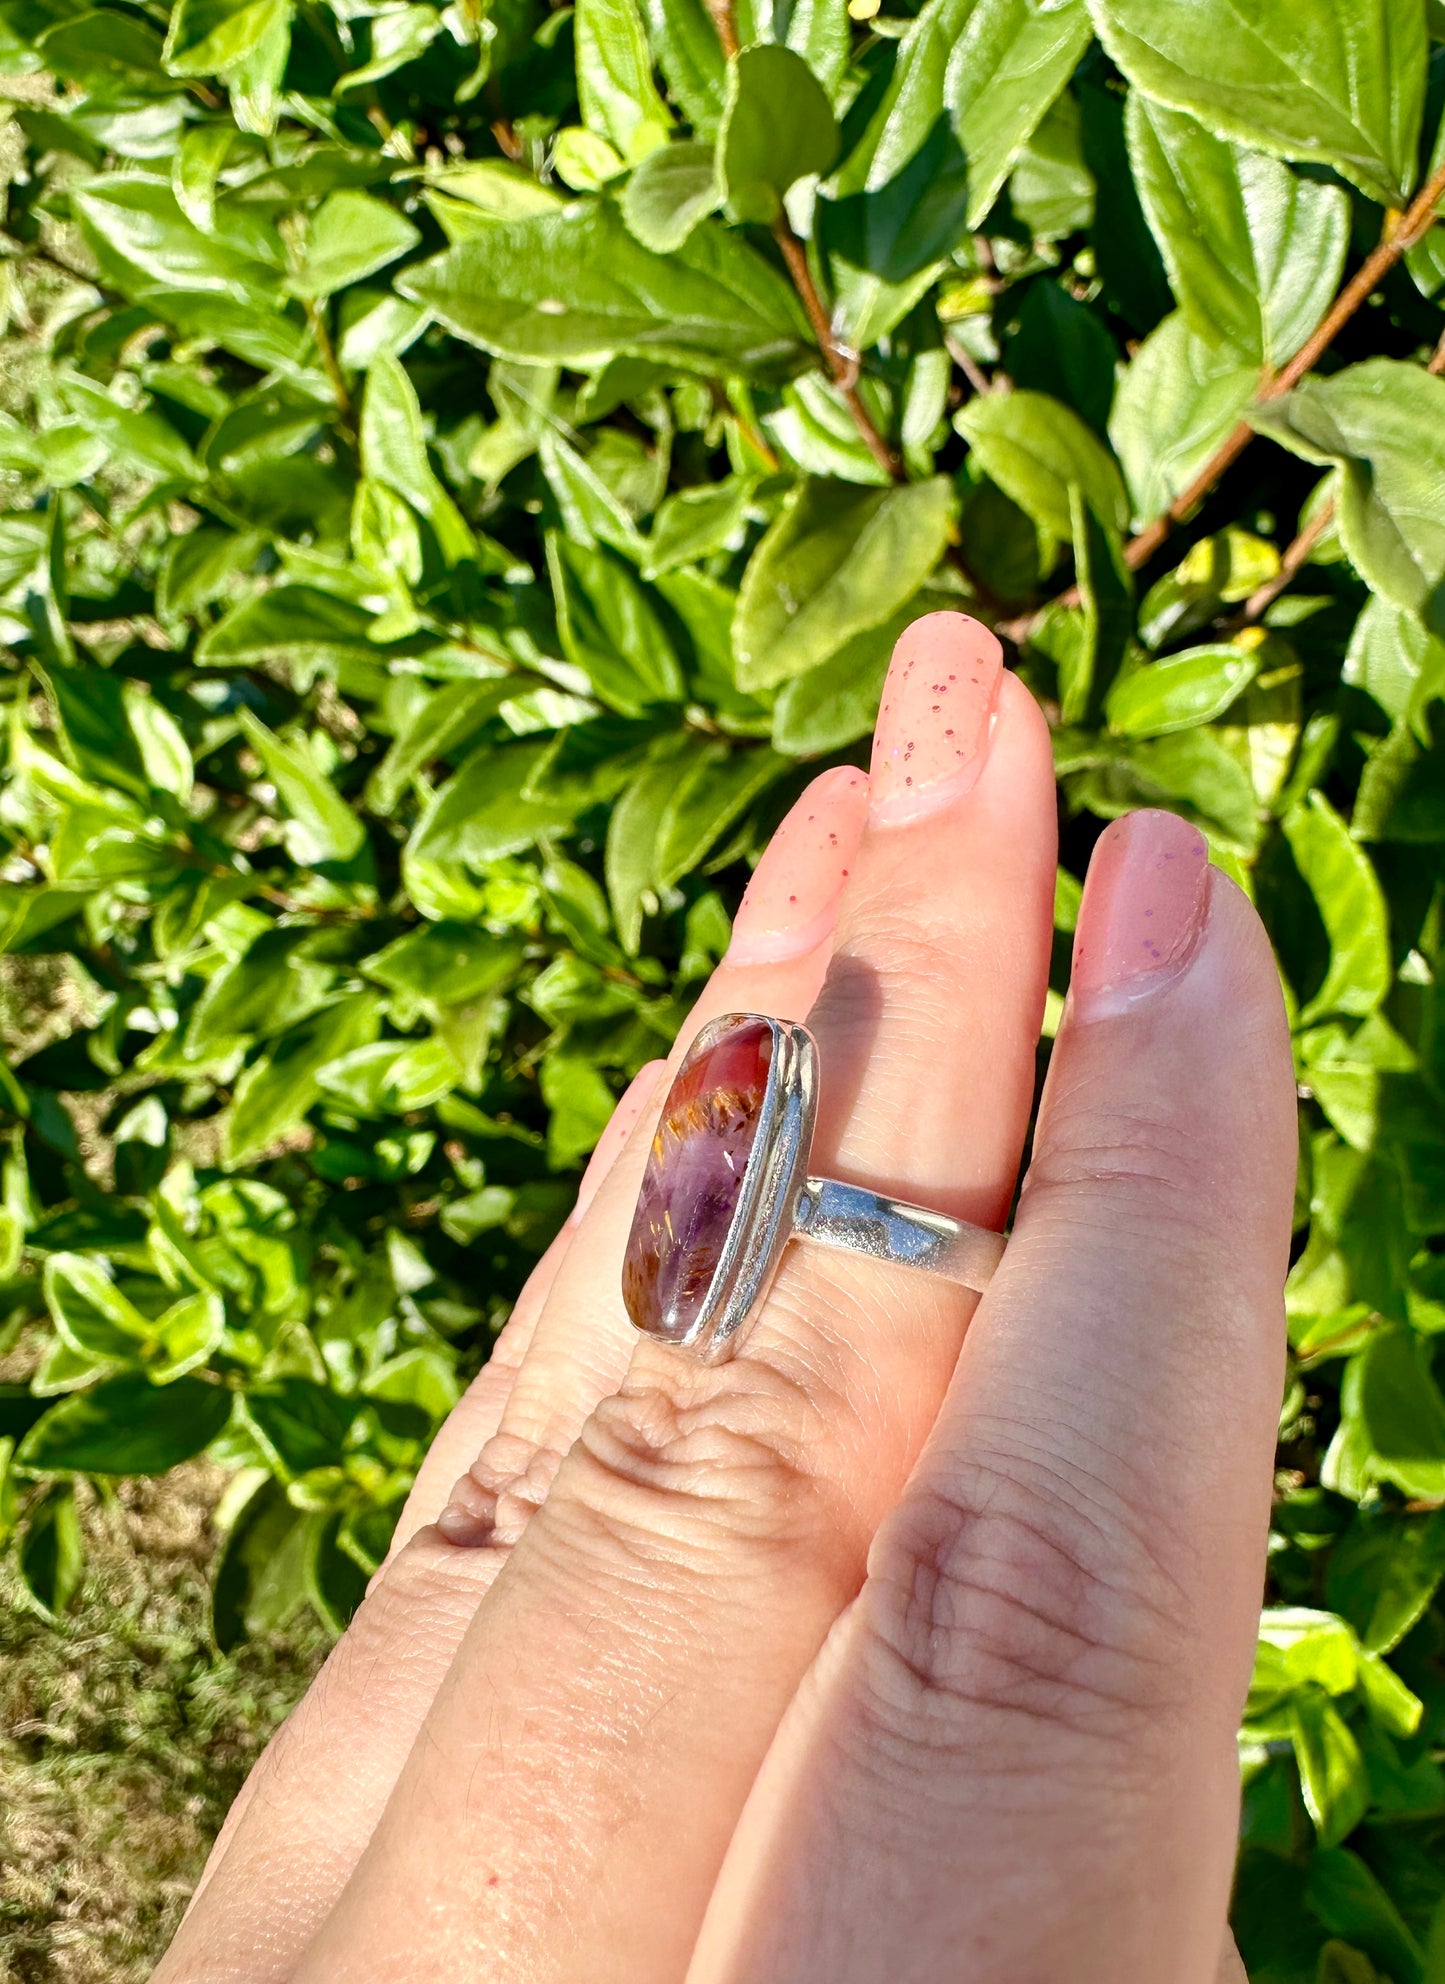 Divine Handcrafted Gemstone Sterling Silver Cacoxenite Ring - Size 7.5: Rare Crystal Embellishment, Enhances Spiritual Connection, Elegant Jewelry Design